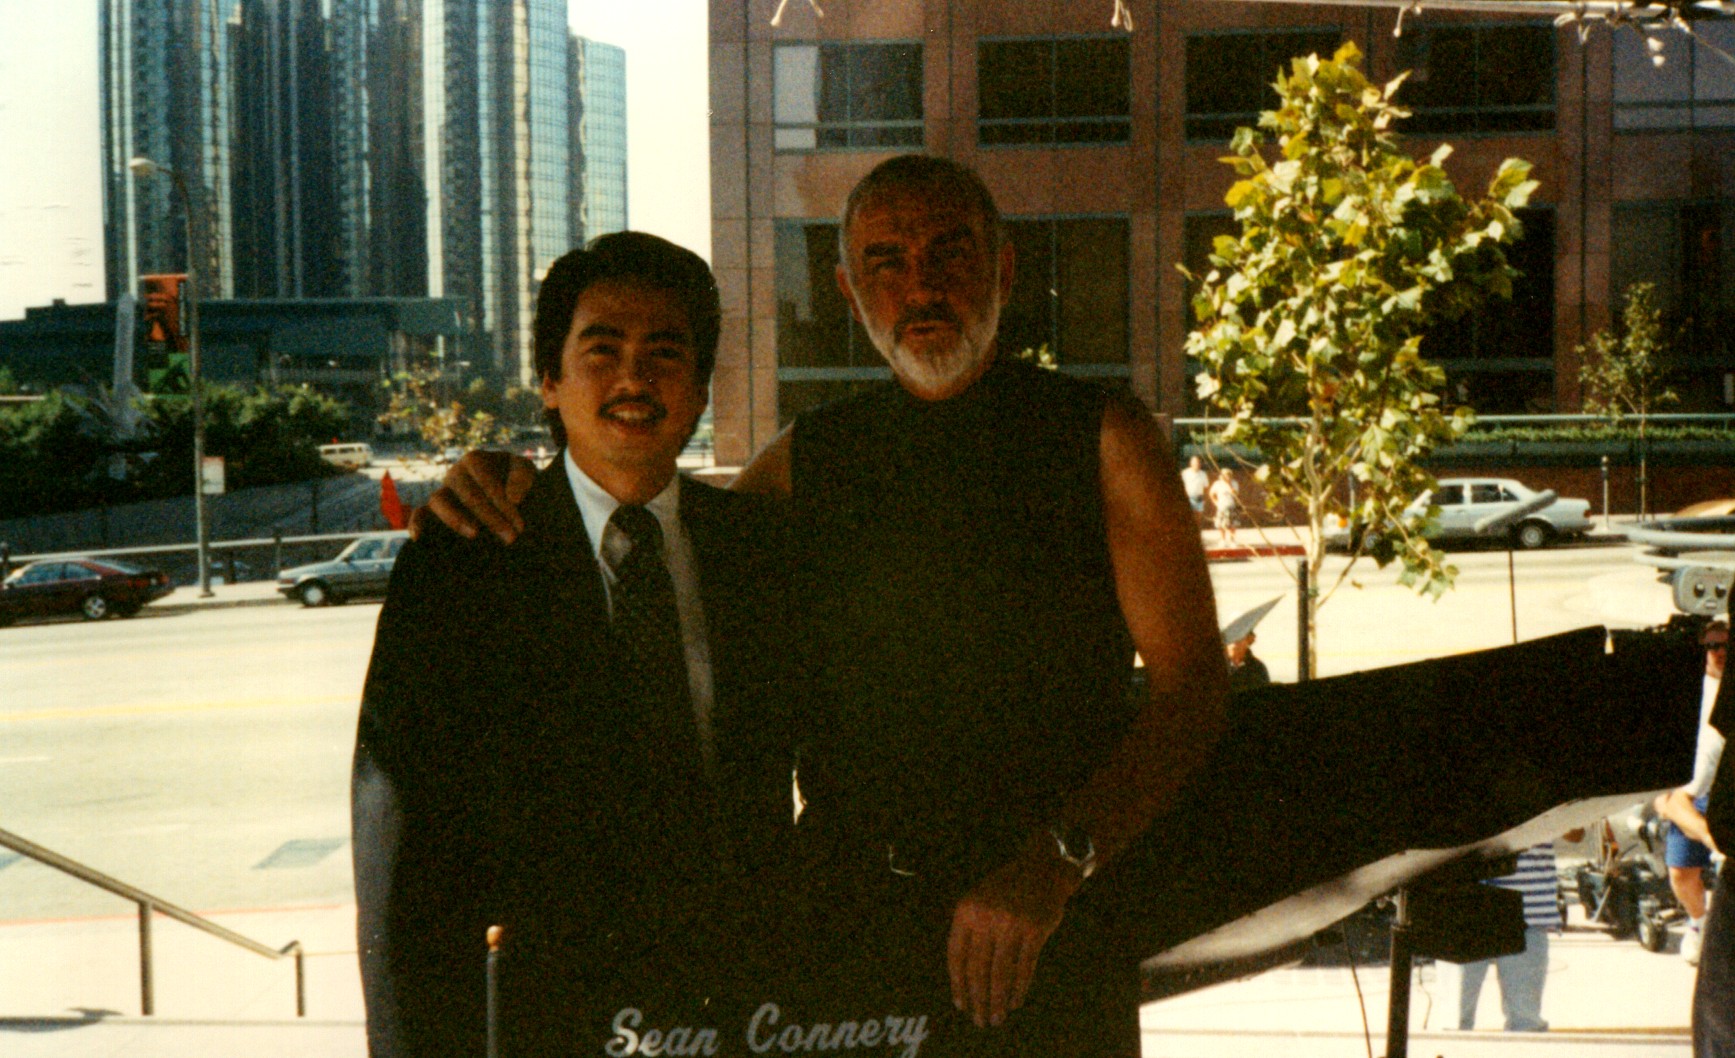 Stan Egi and Sean Connery on the set of Rising Sun